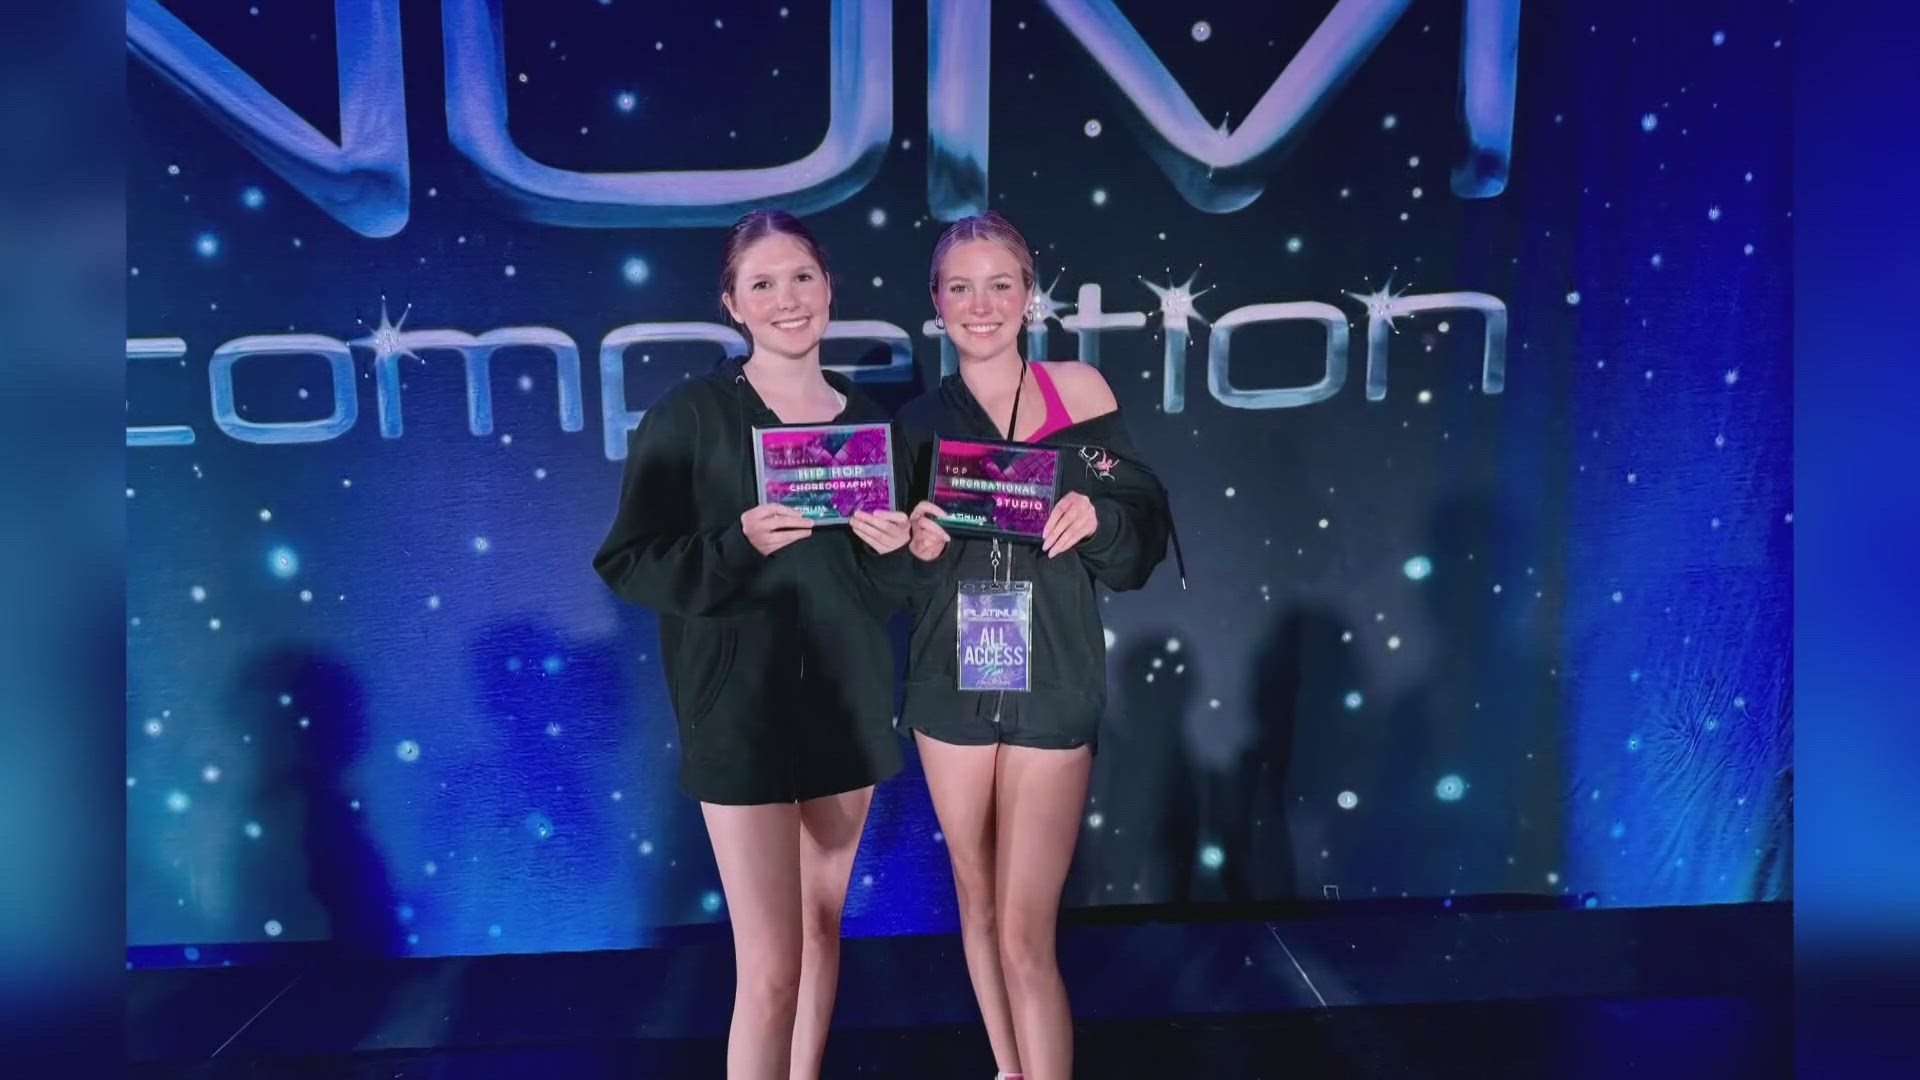 Madison and Reilly Hughes opened Level Up Dance Company two years ago when the sisters were 16 years old and 14 years old.